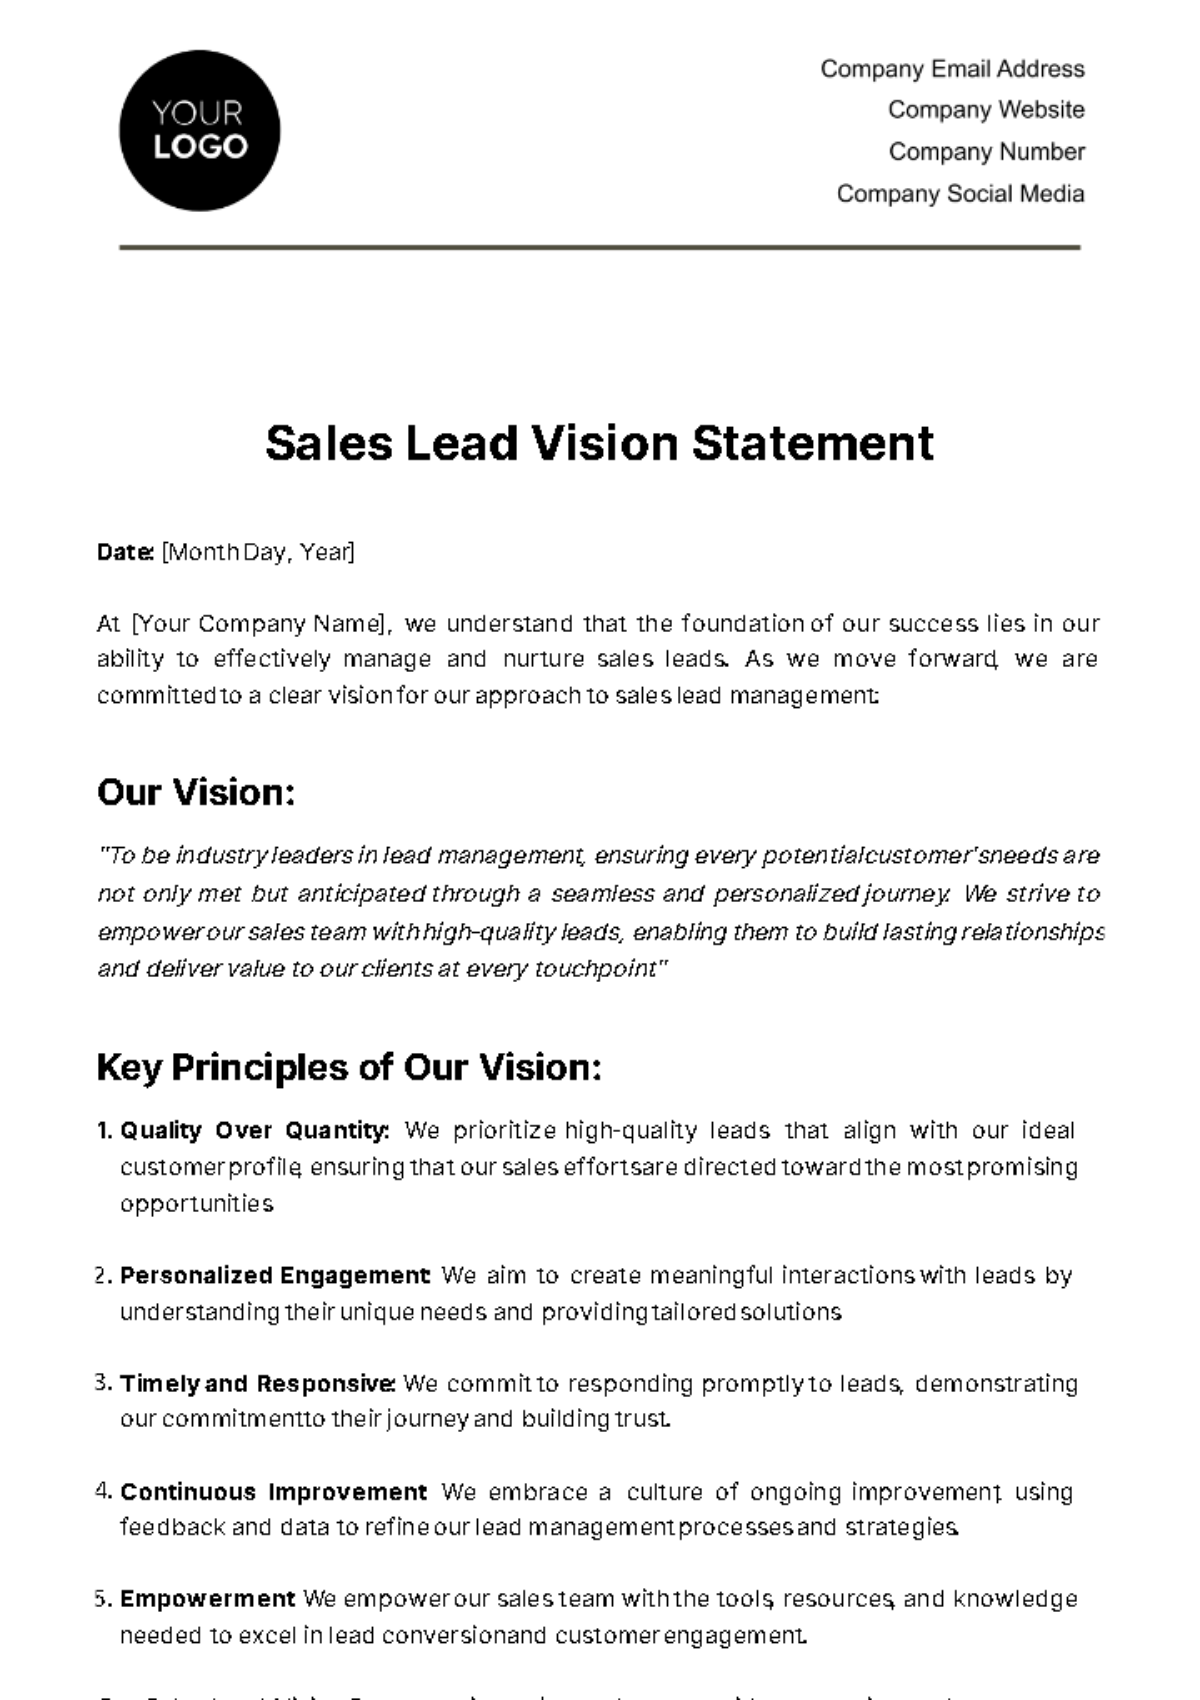 Free Sales Lead Vision Statement Template